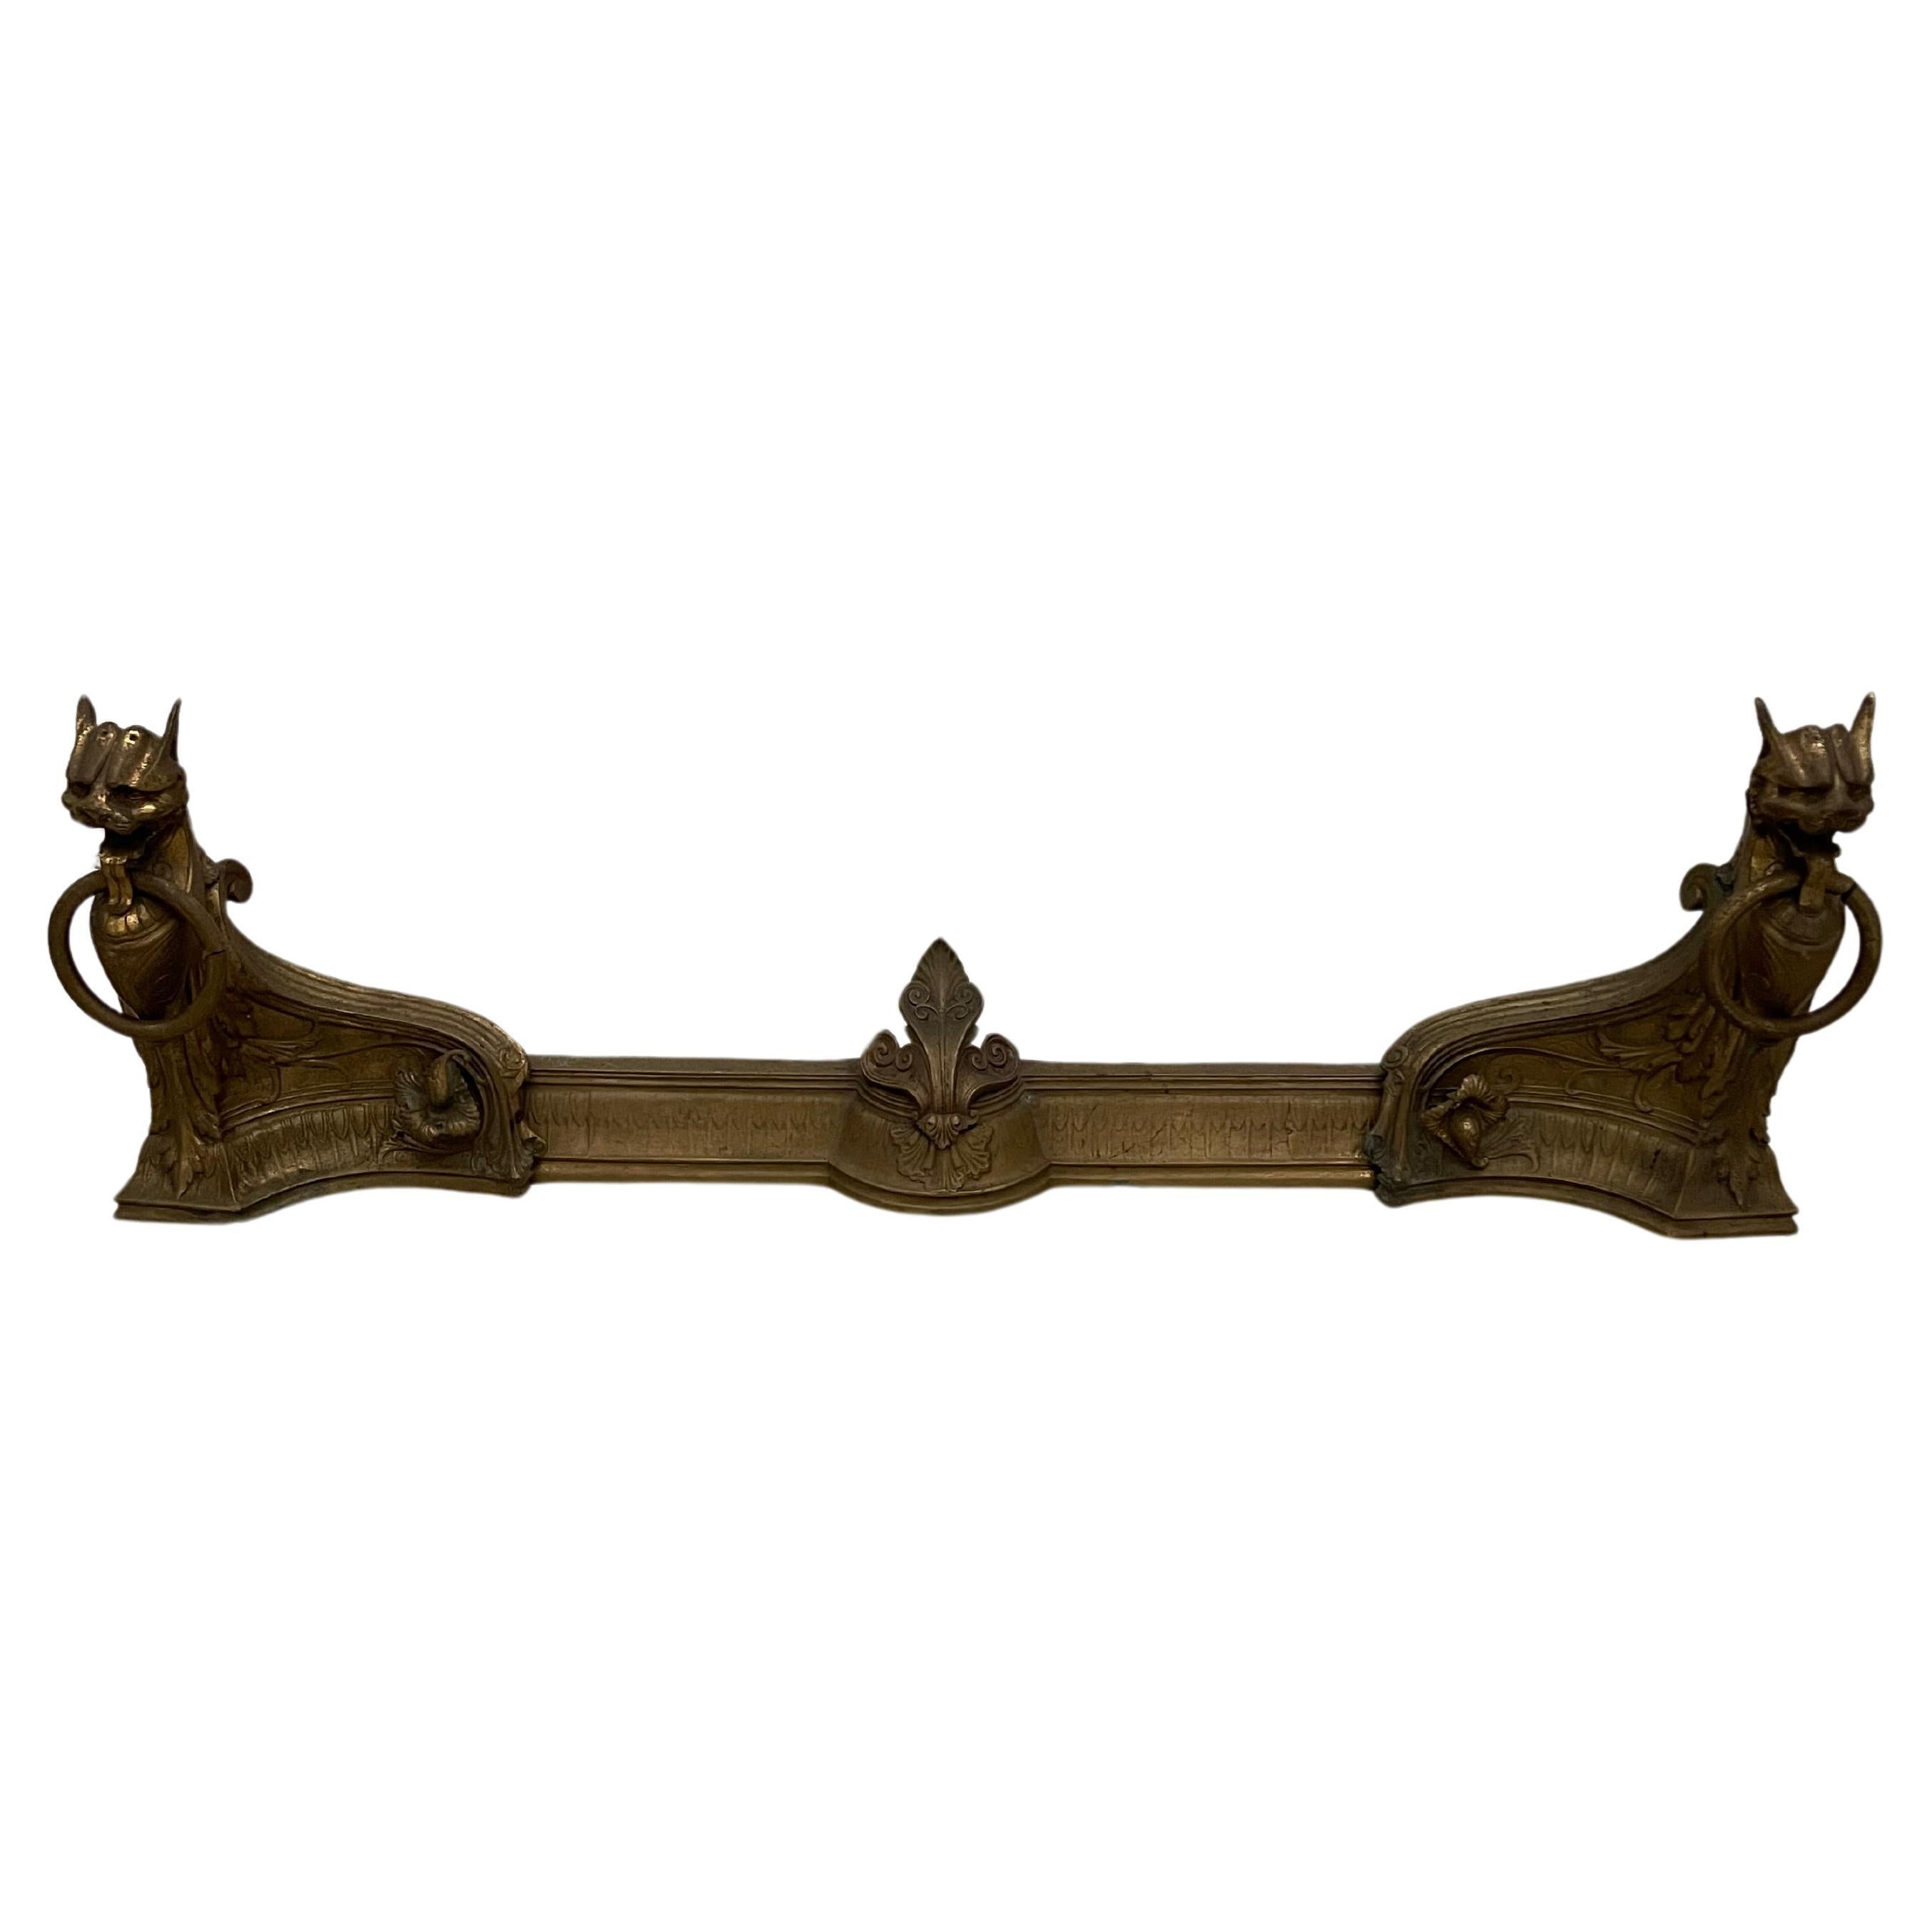 French Bronze Adjustable Fender In The Manner Of Barbedienne, Late 19th Century For Sale